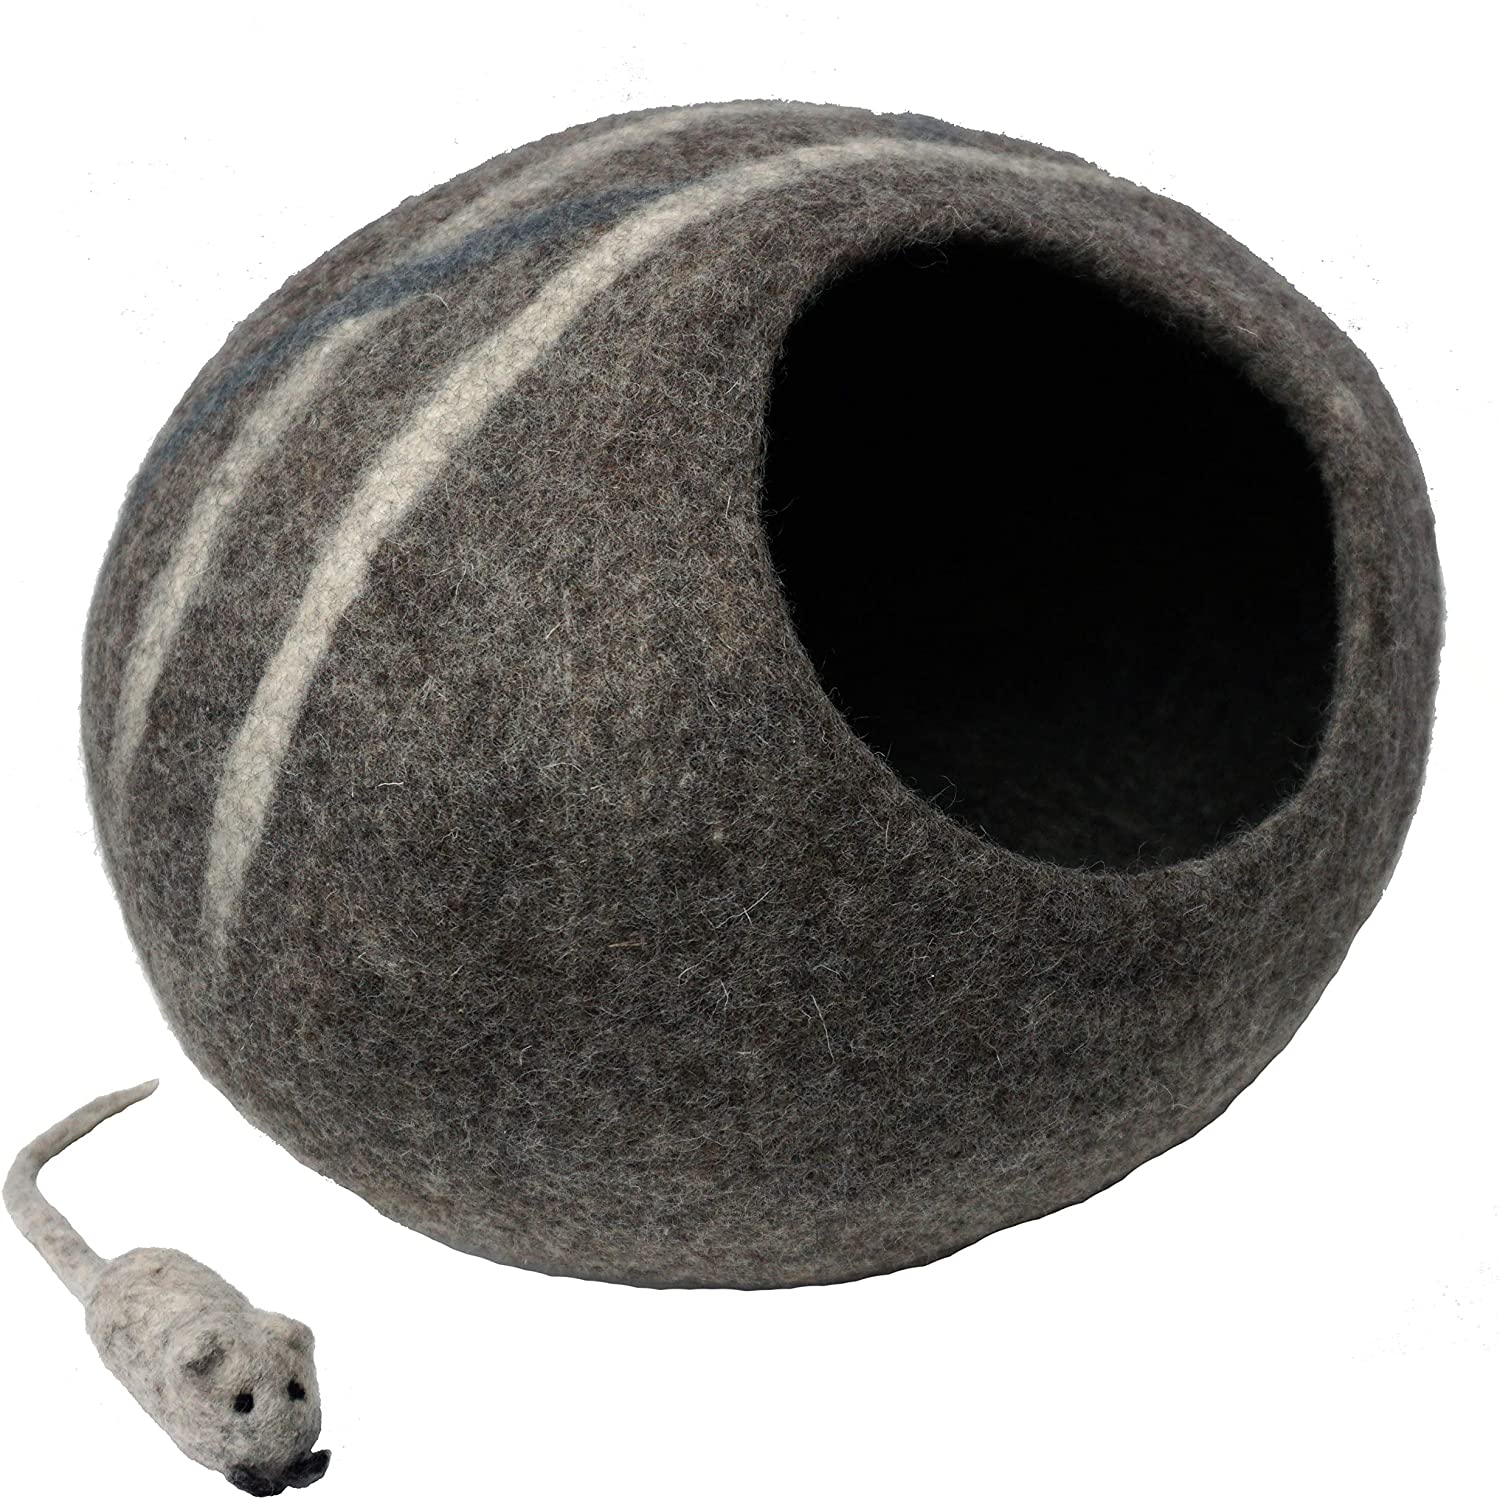 Mokoboho 100% Wool Felt Cat Cave Bed Handmade in Nepal with Free Mouse Toy  Included (Gray Stripe)